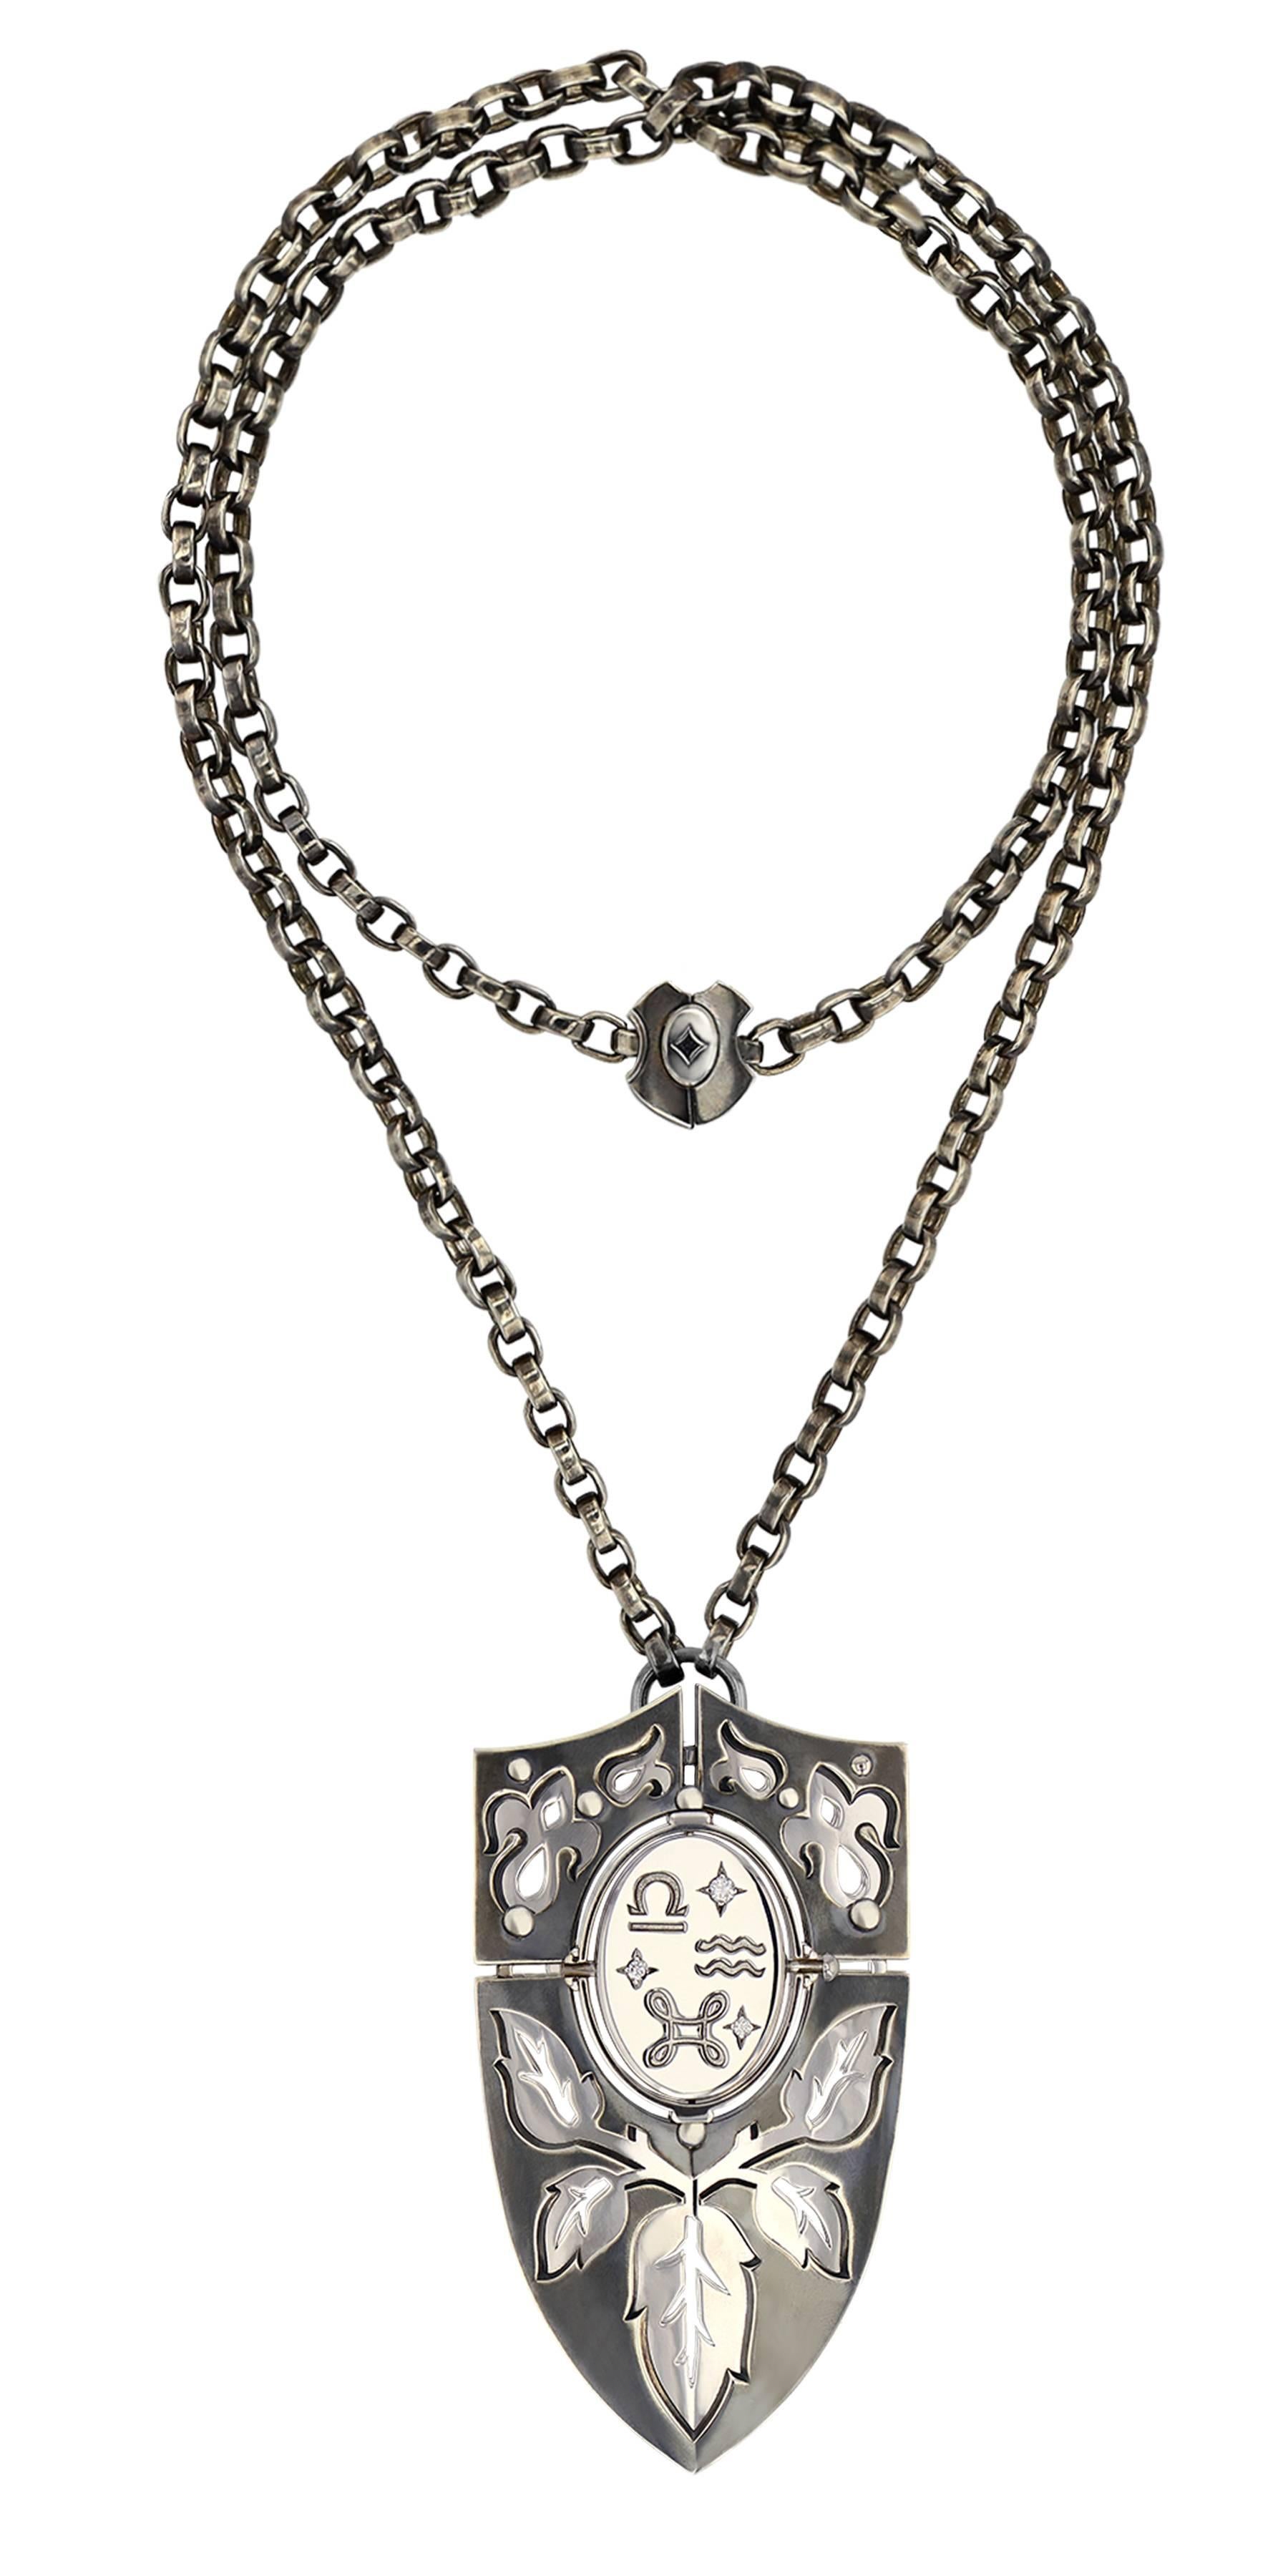 Shield Pendant AIR

Necklace of arms necklace mounted on a patinated silver chain, with a silver and yellow gold clasp engraved with tarot colors. The necklace is pierced, revealing plates with embossed motifs depicting the seasons. The pivoting